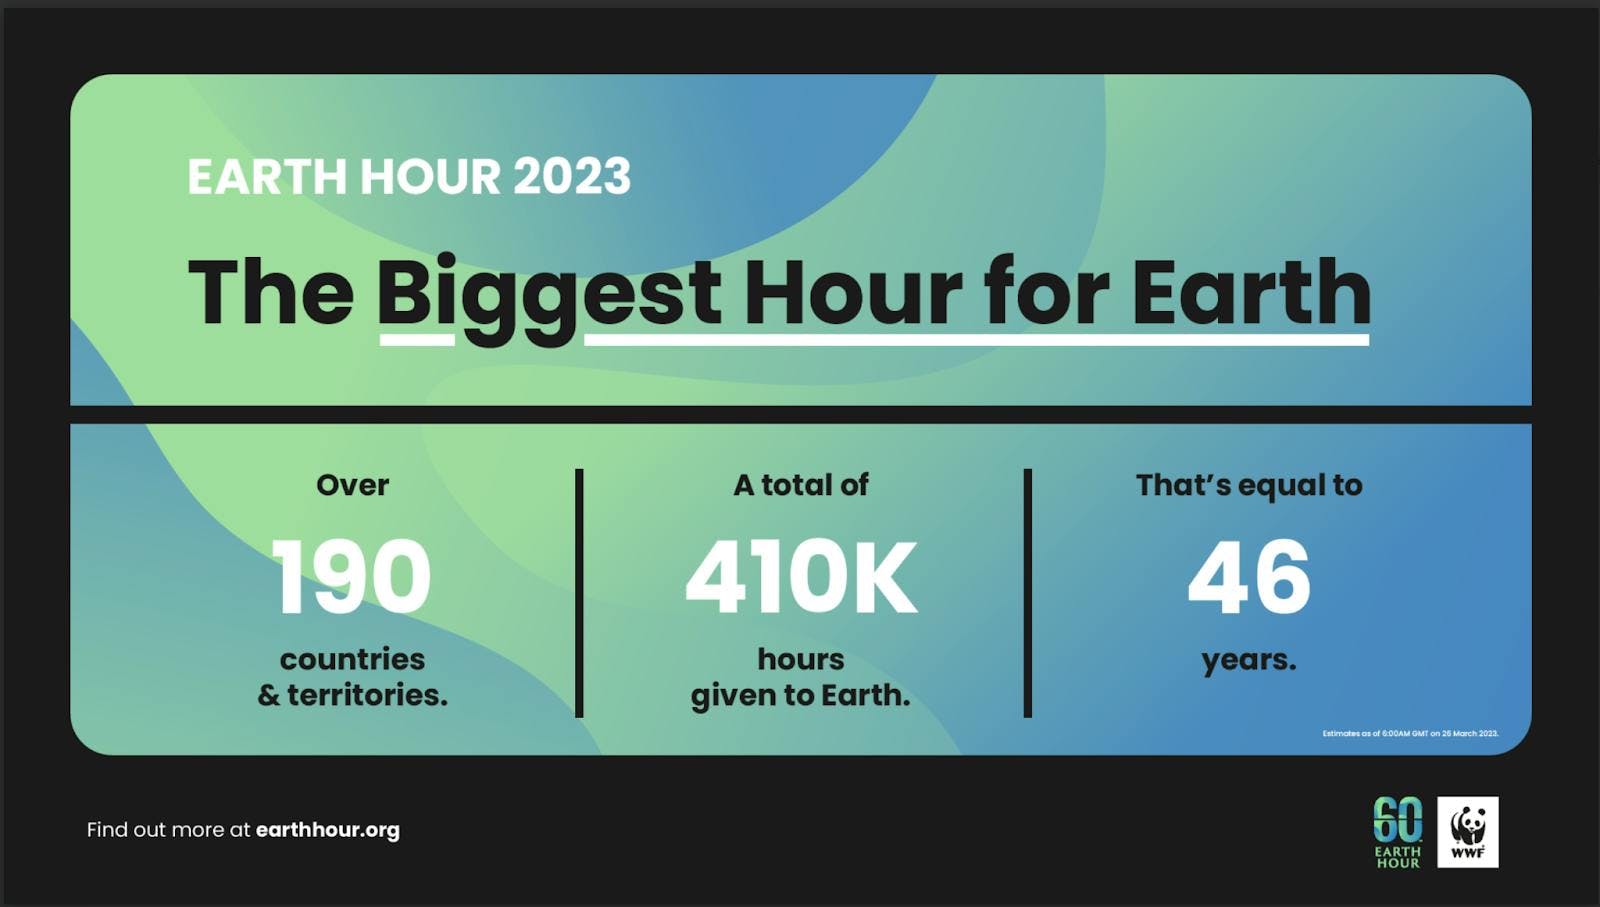 Statistics showing that 190 countries and territories participated in The Biggest Hour for Earth, giving back a total of 410K hours to Earth, which is equal to 46 years.